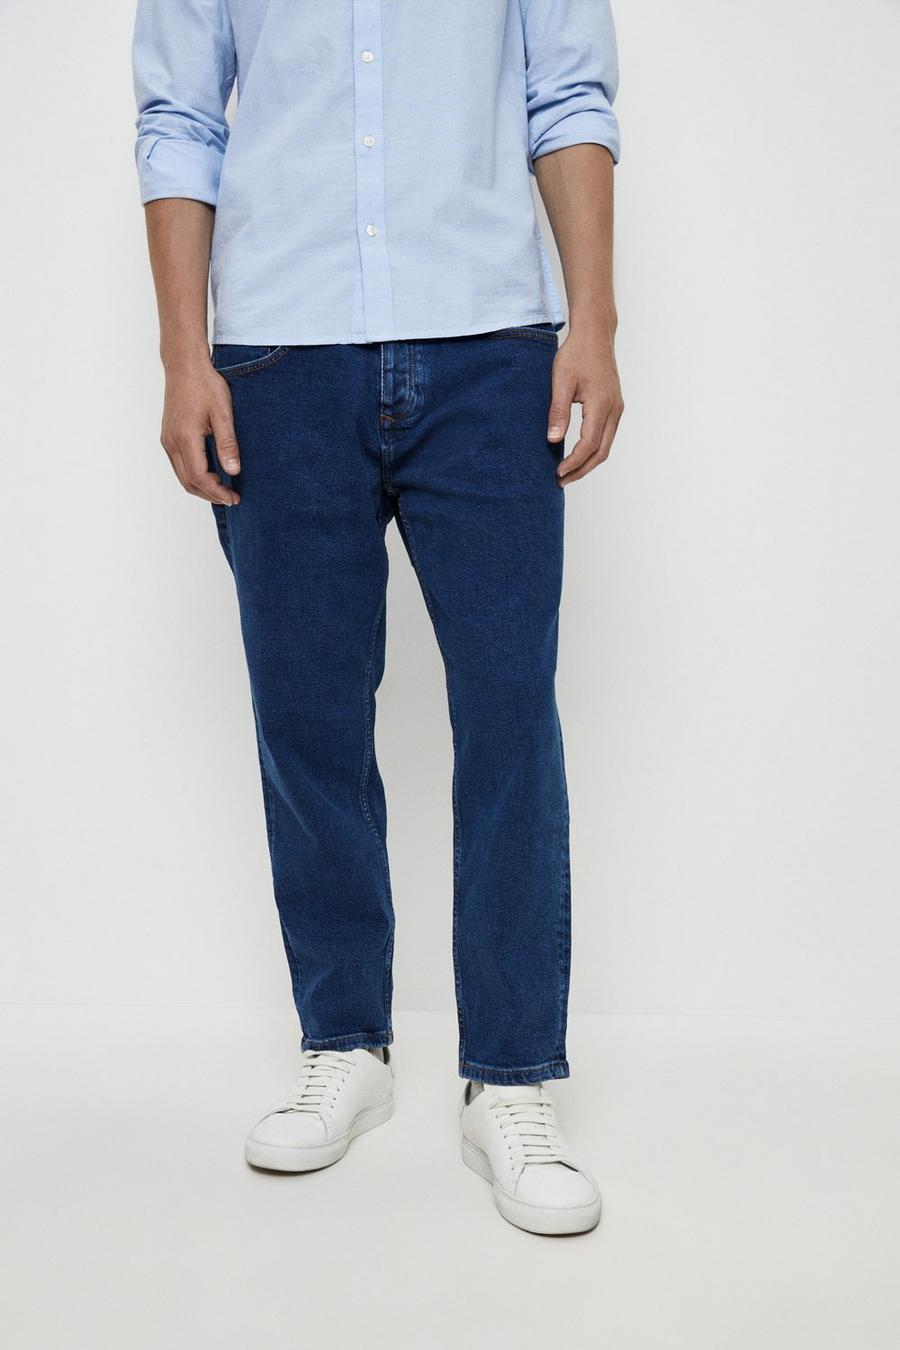 (!) Tapered Blue Rinse Jeans